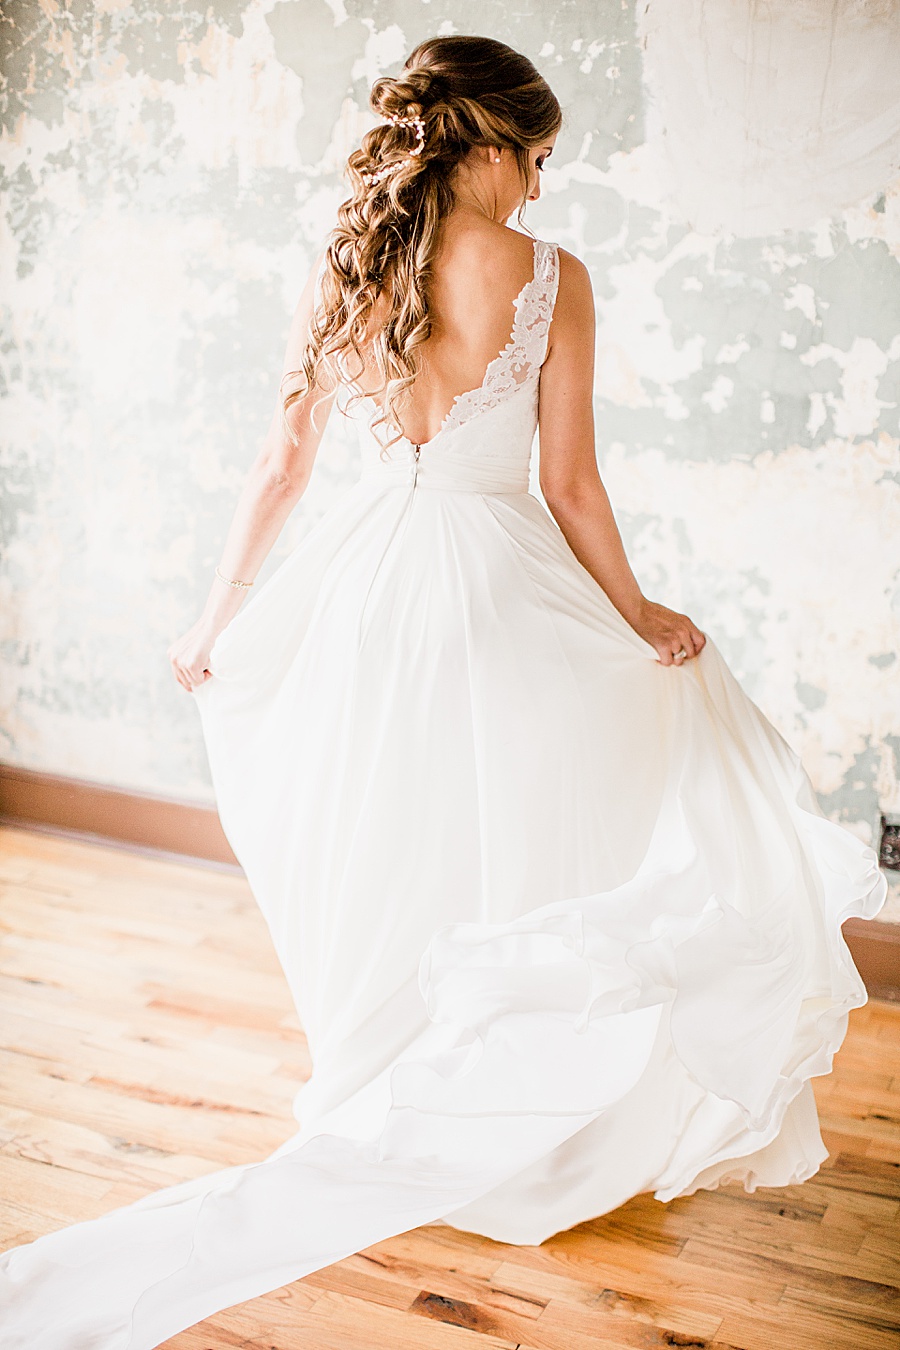 Bride twirling at this Wedding at The Standard by Knoxville Wedding Photographer, Amanda May Photos.